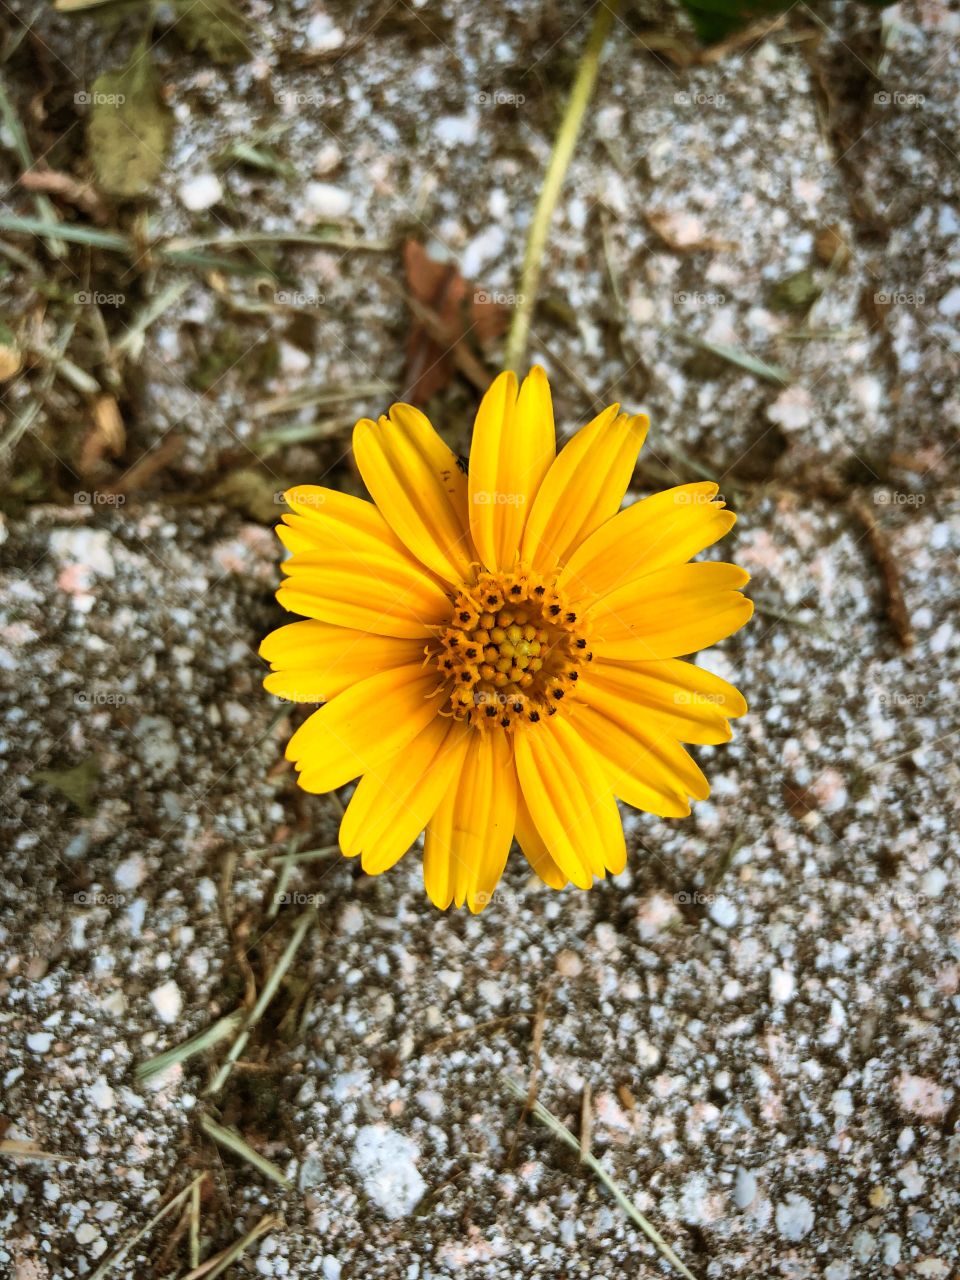 Wildflower in the pavement